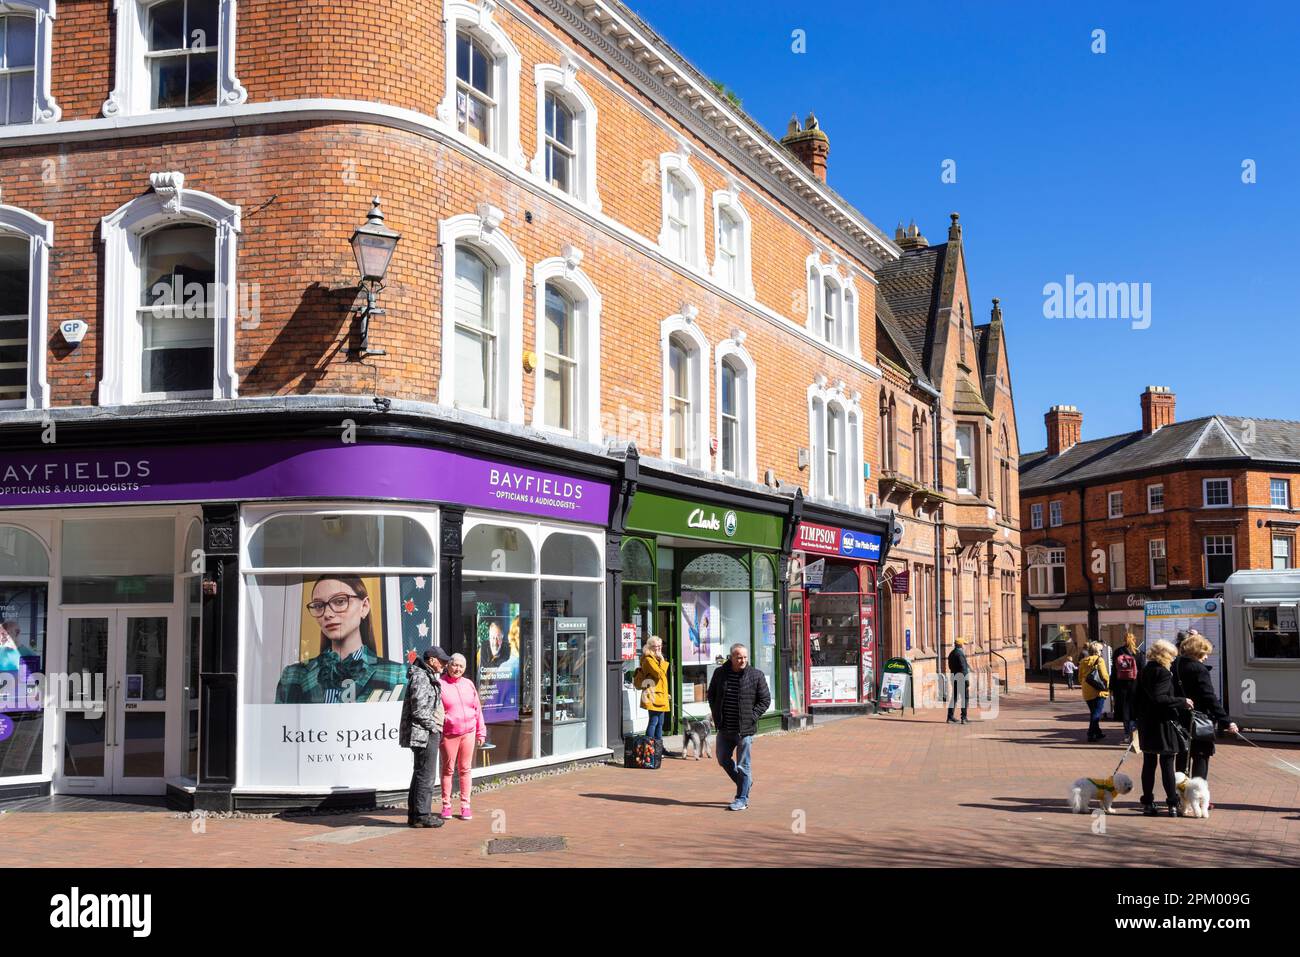 Nantwich Cheshire East - Nantwich high street Bayfields at Pinnington Opticians with people shopping in the town square Nantwich Cheshire England UK Stock Photo